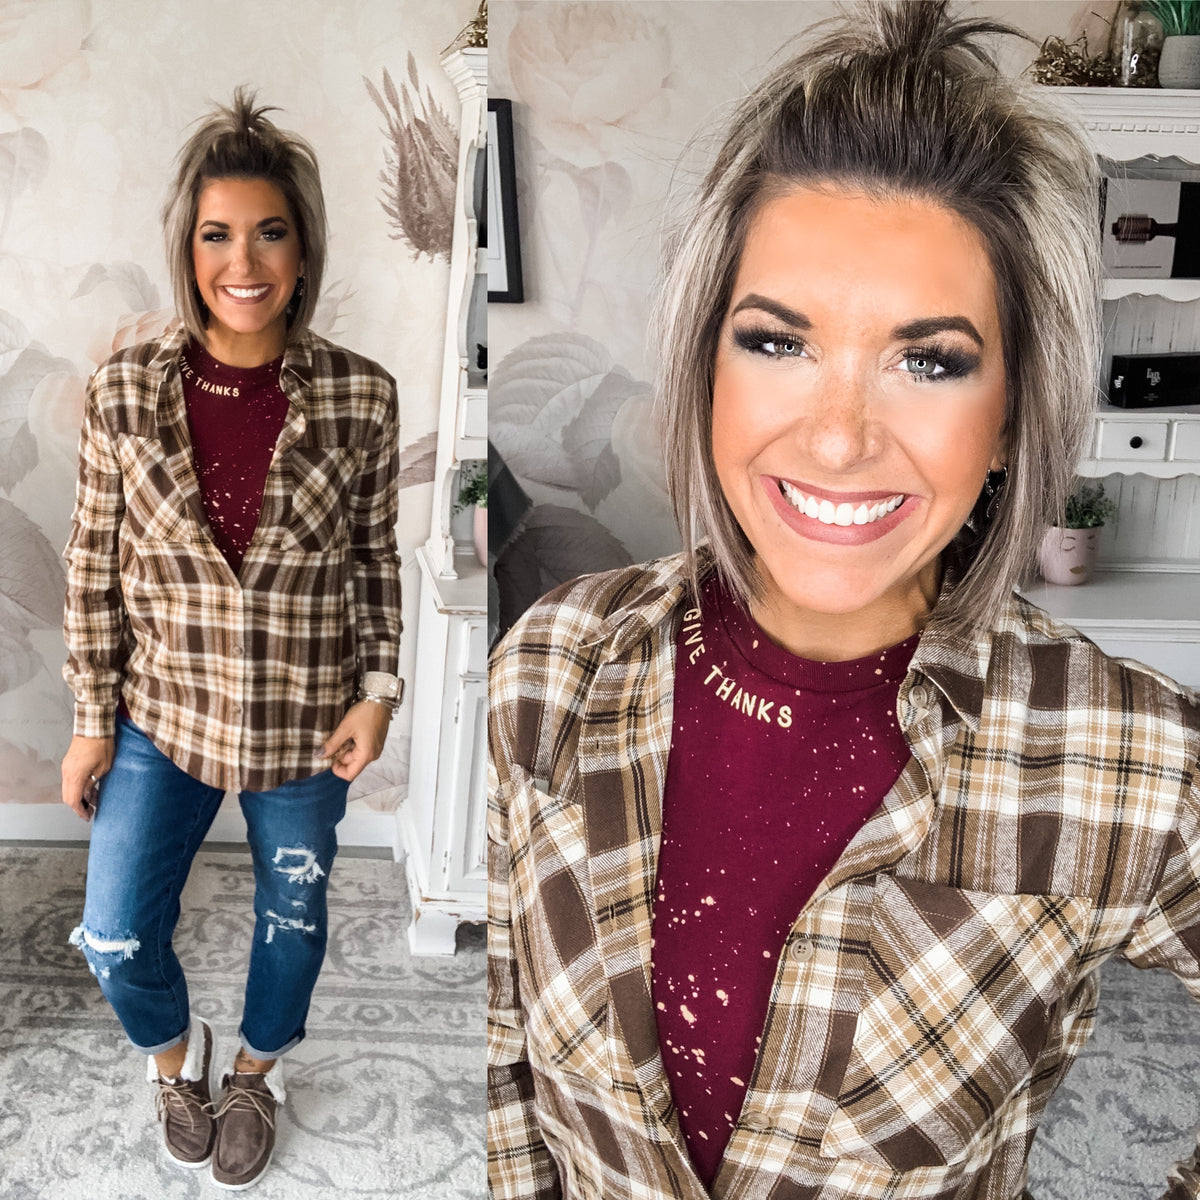 Just A Glimpse Button Down - Brown